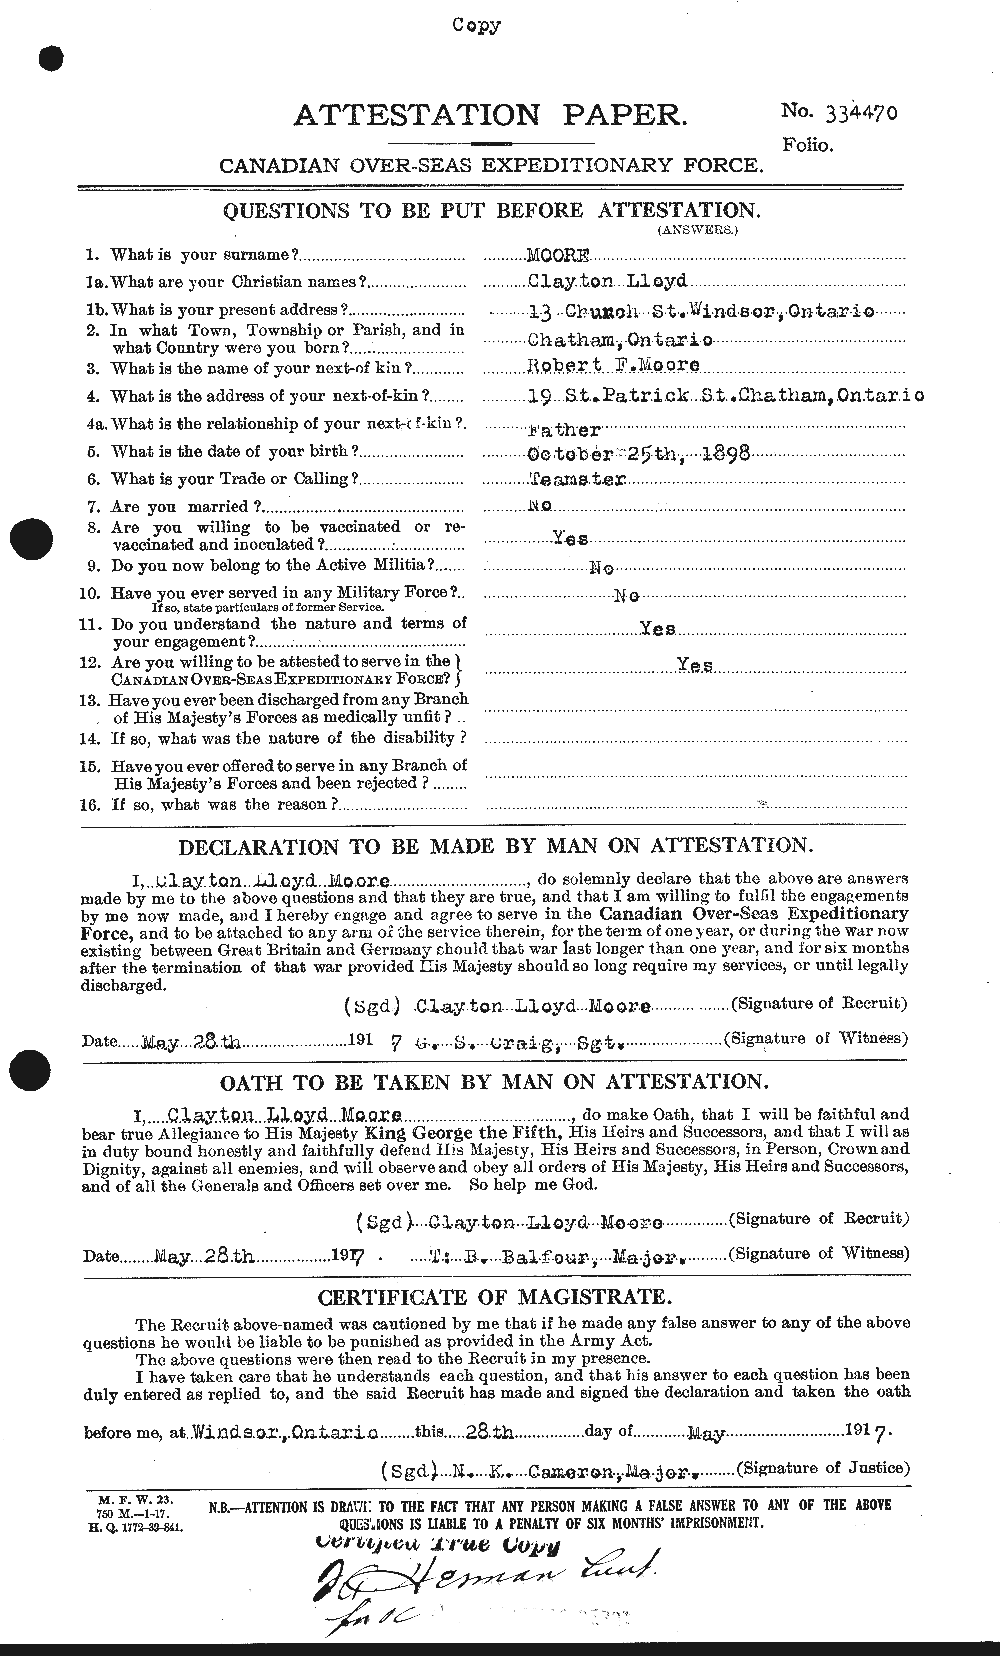 Personnel Records of the First World War - CEF 506543a